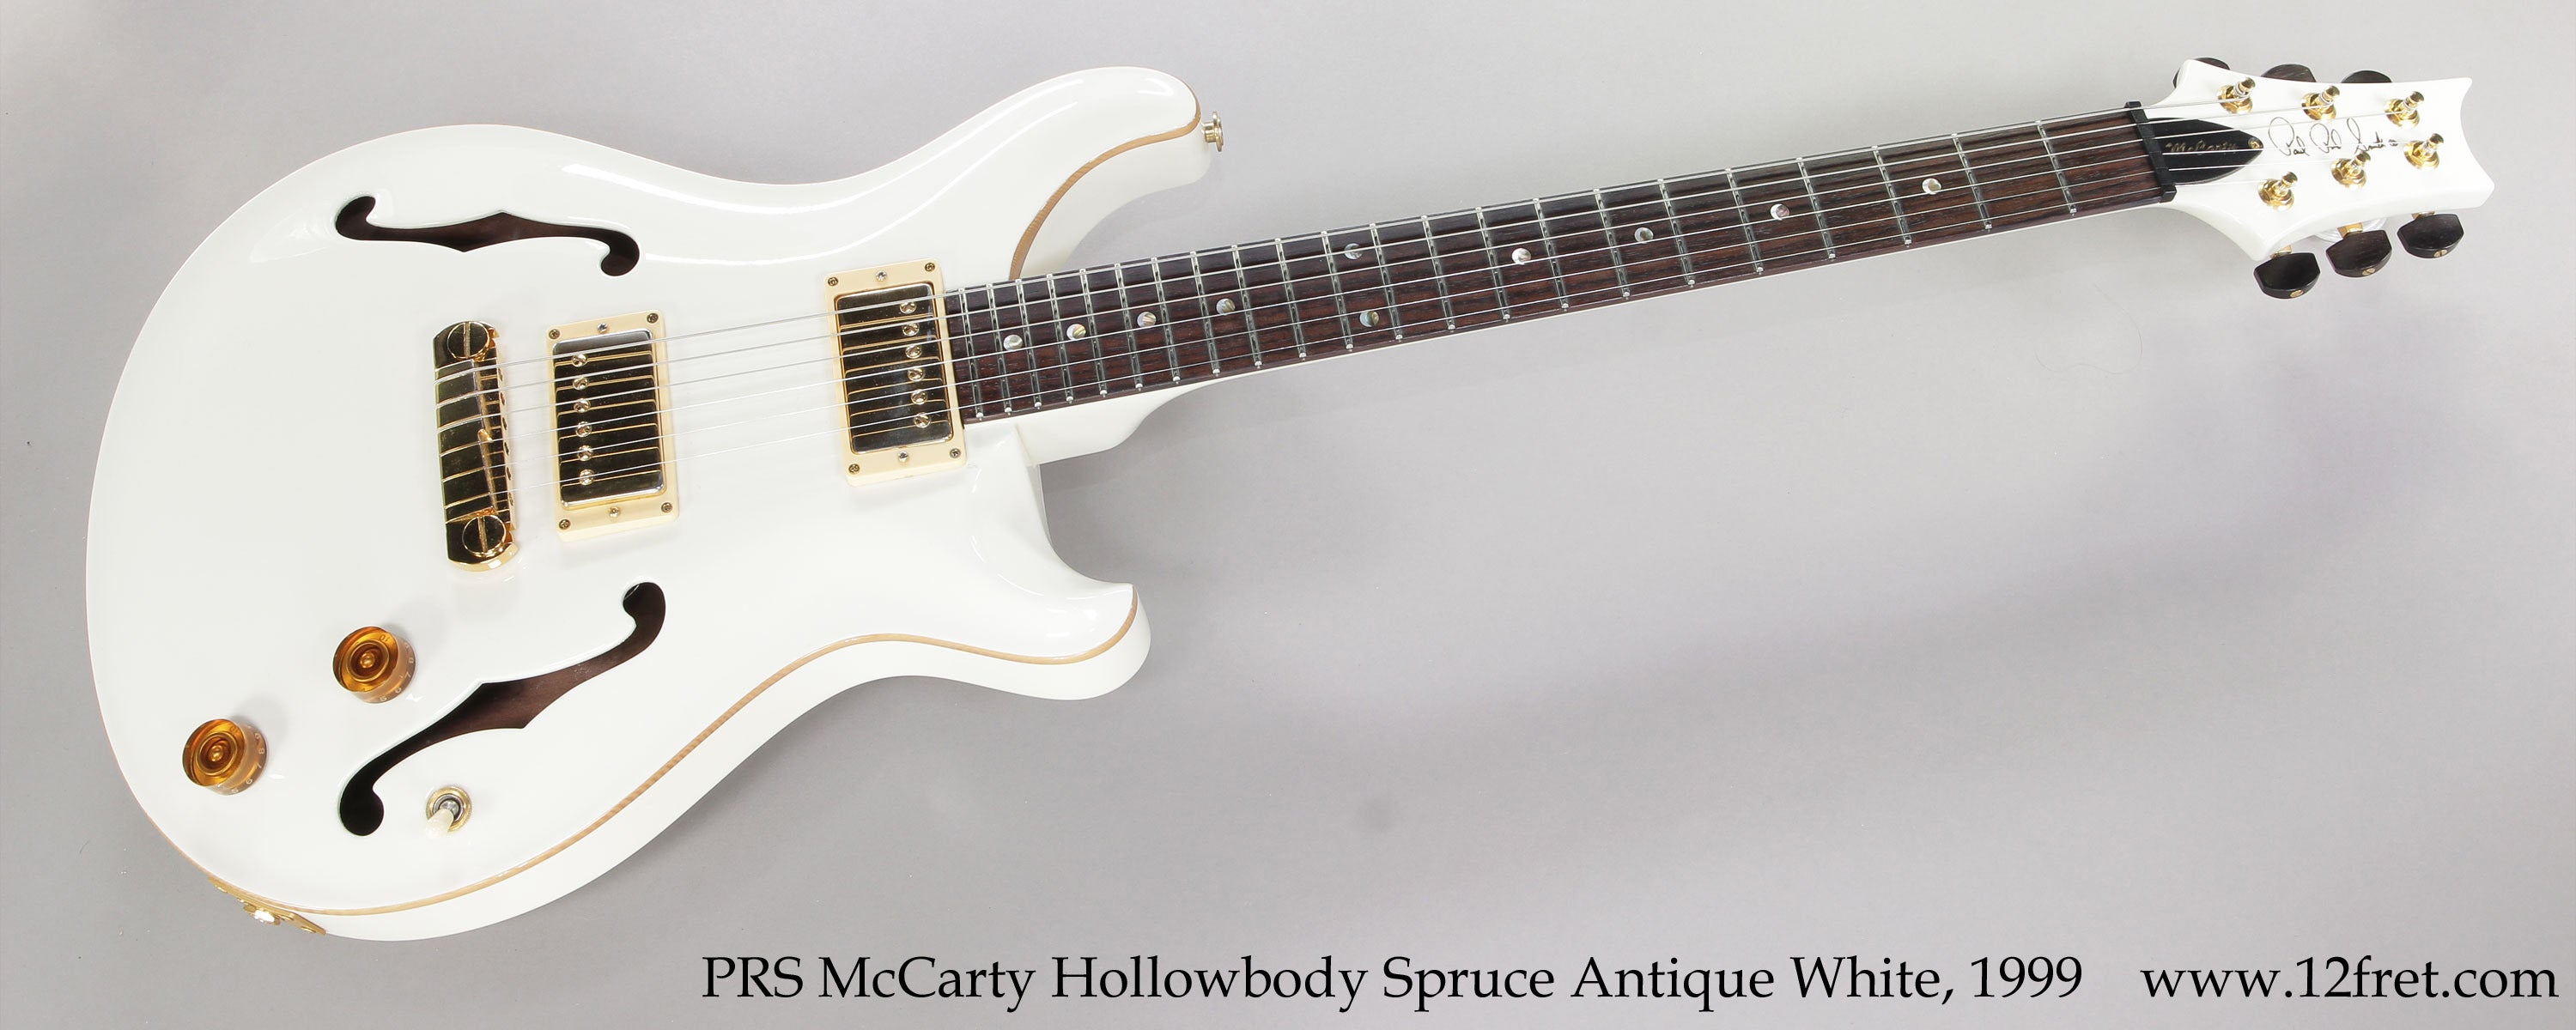 PRS McCarty Hollowbody Spruce Antique White, 1999  - The Twelfth Fret